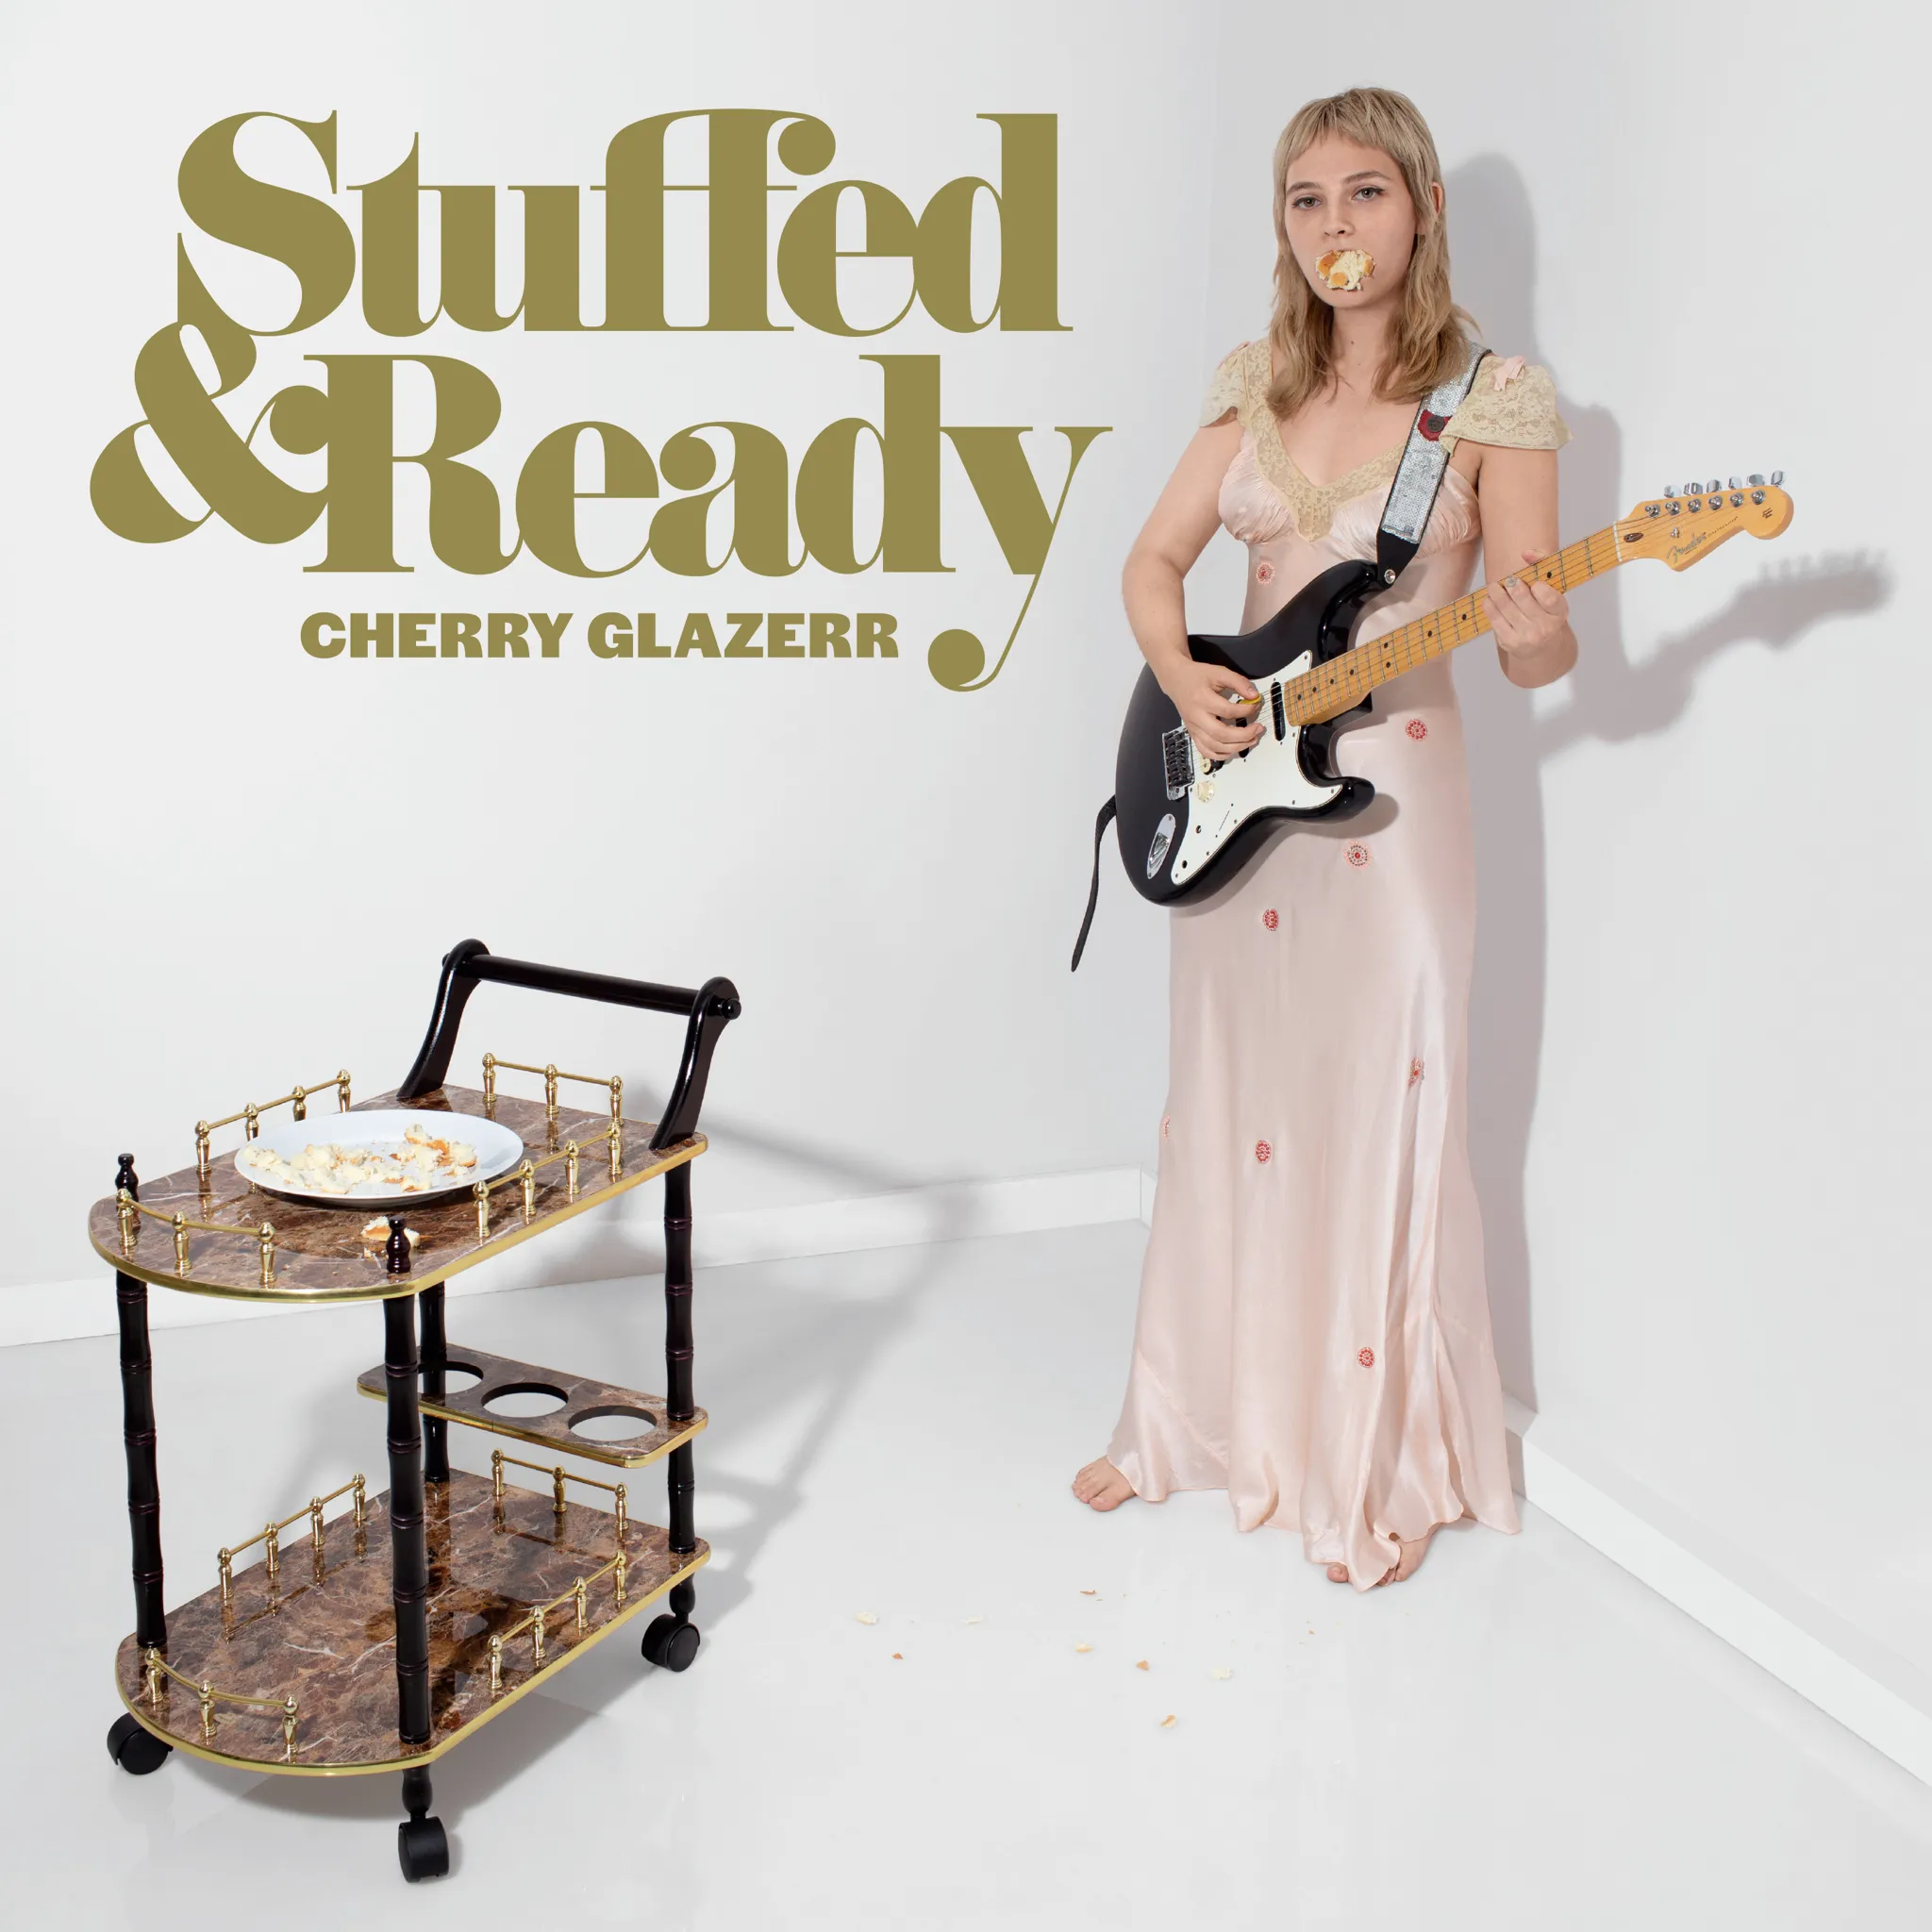 <strong>Cherry Glazerr - Stuffed and Ready</strong> (Cd)